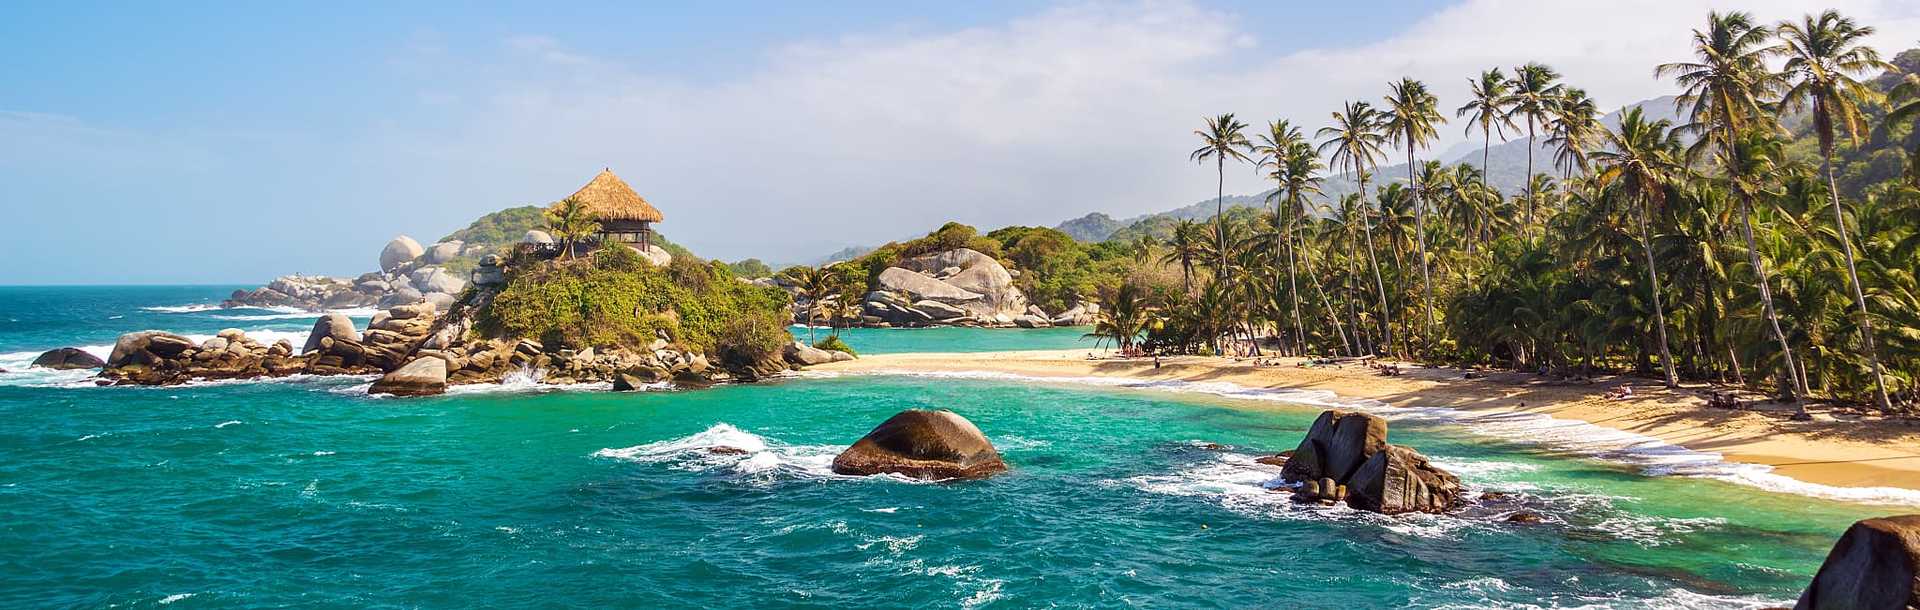 Tayrona National Park in northern Colombia.